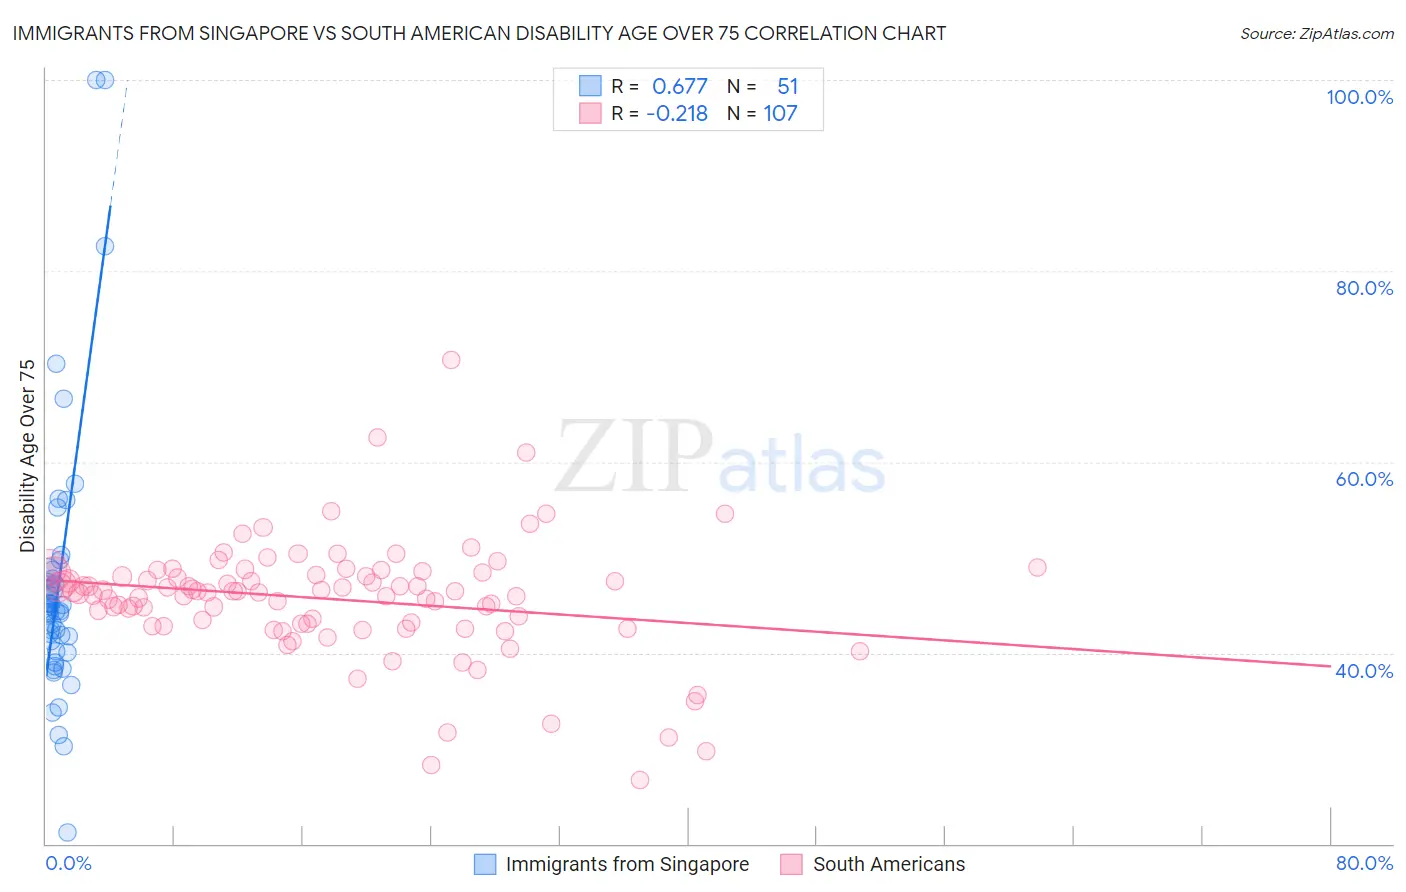 Immigrants from Singapore vs South American Disability Age Over 75